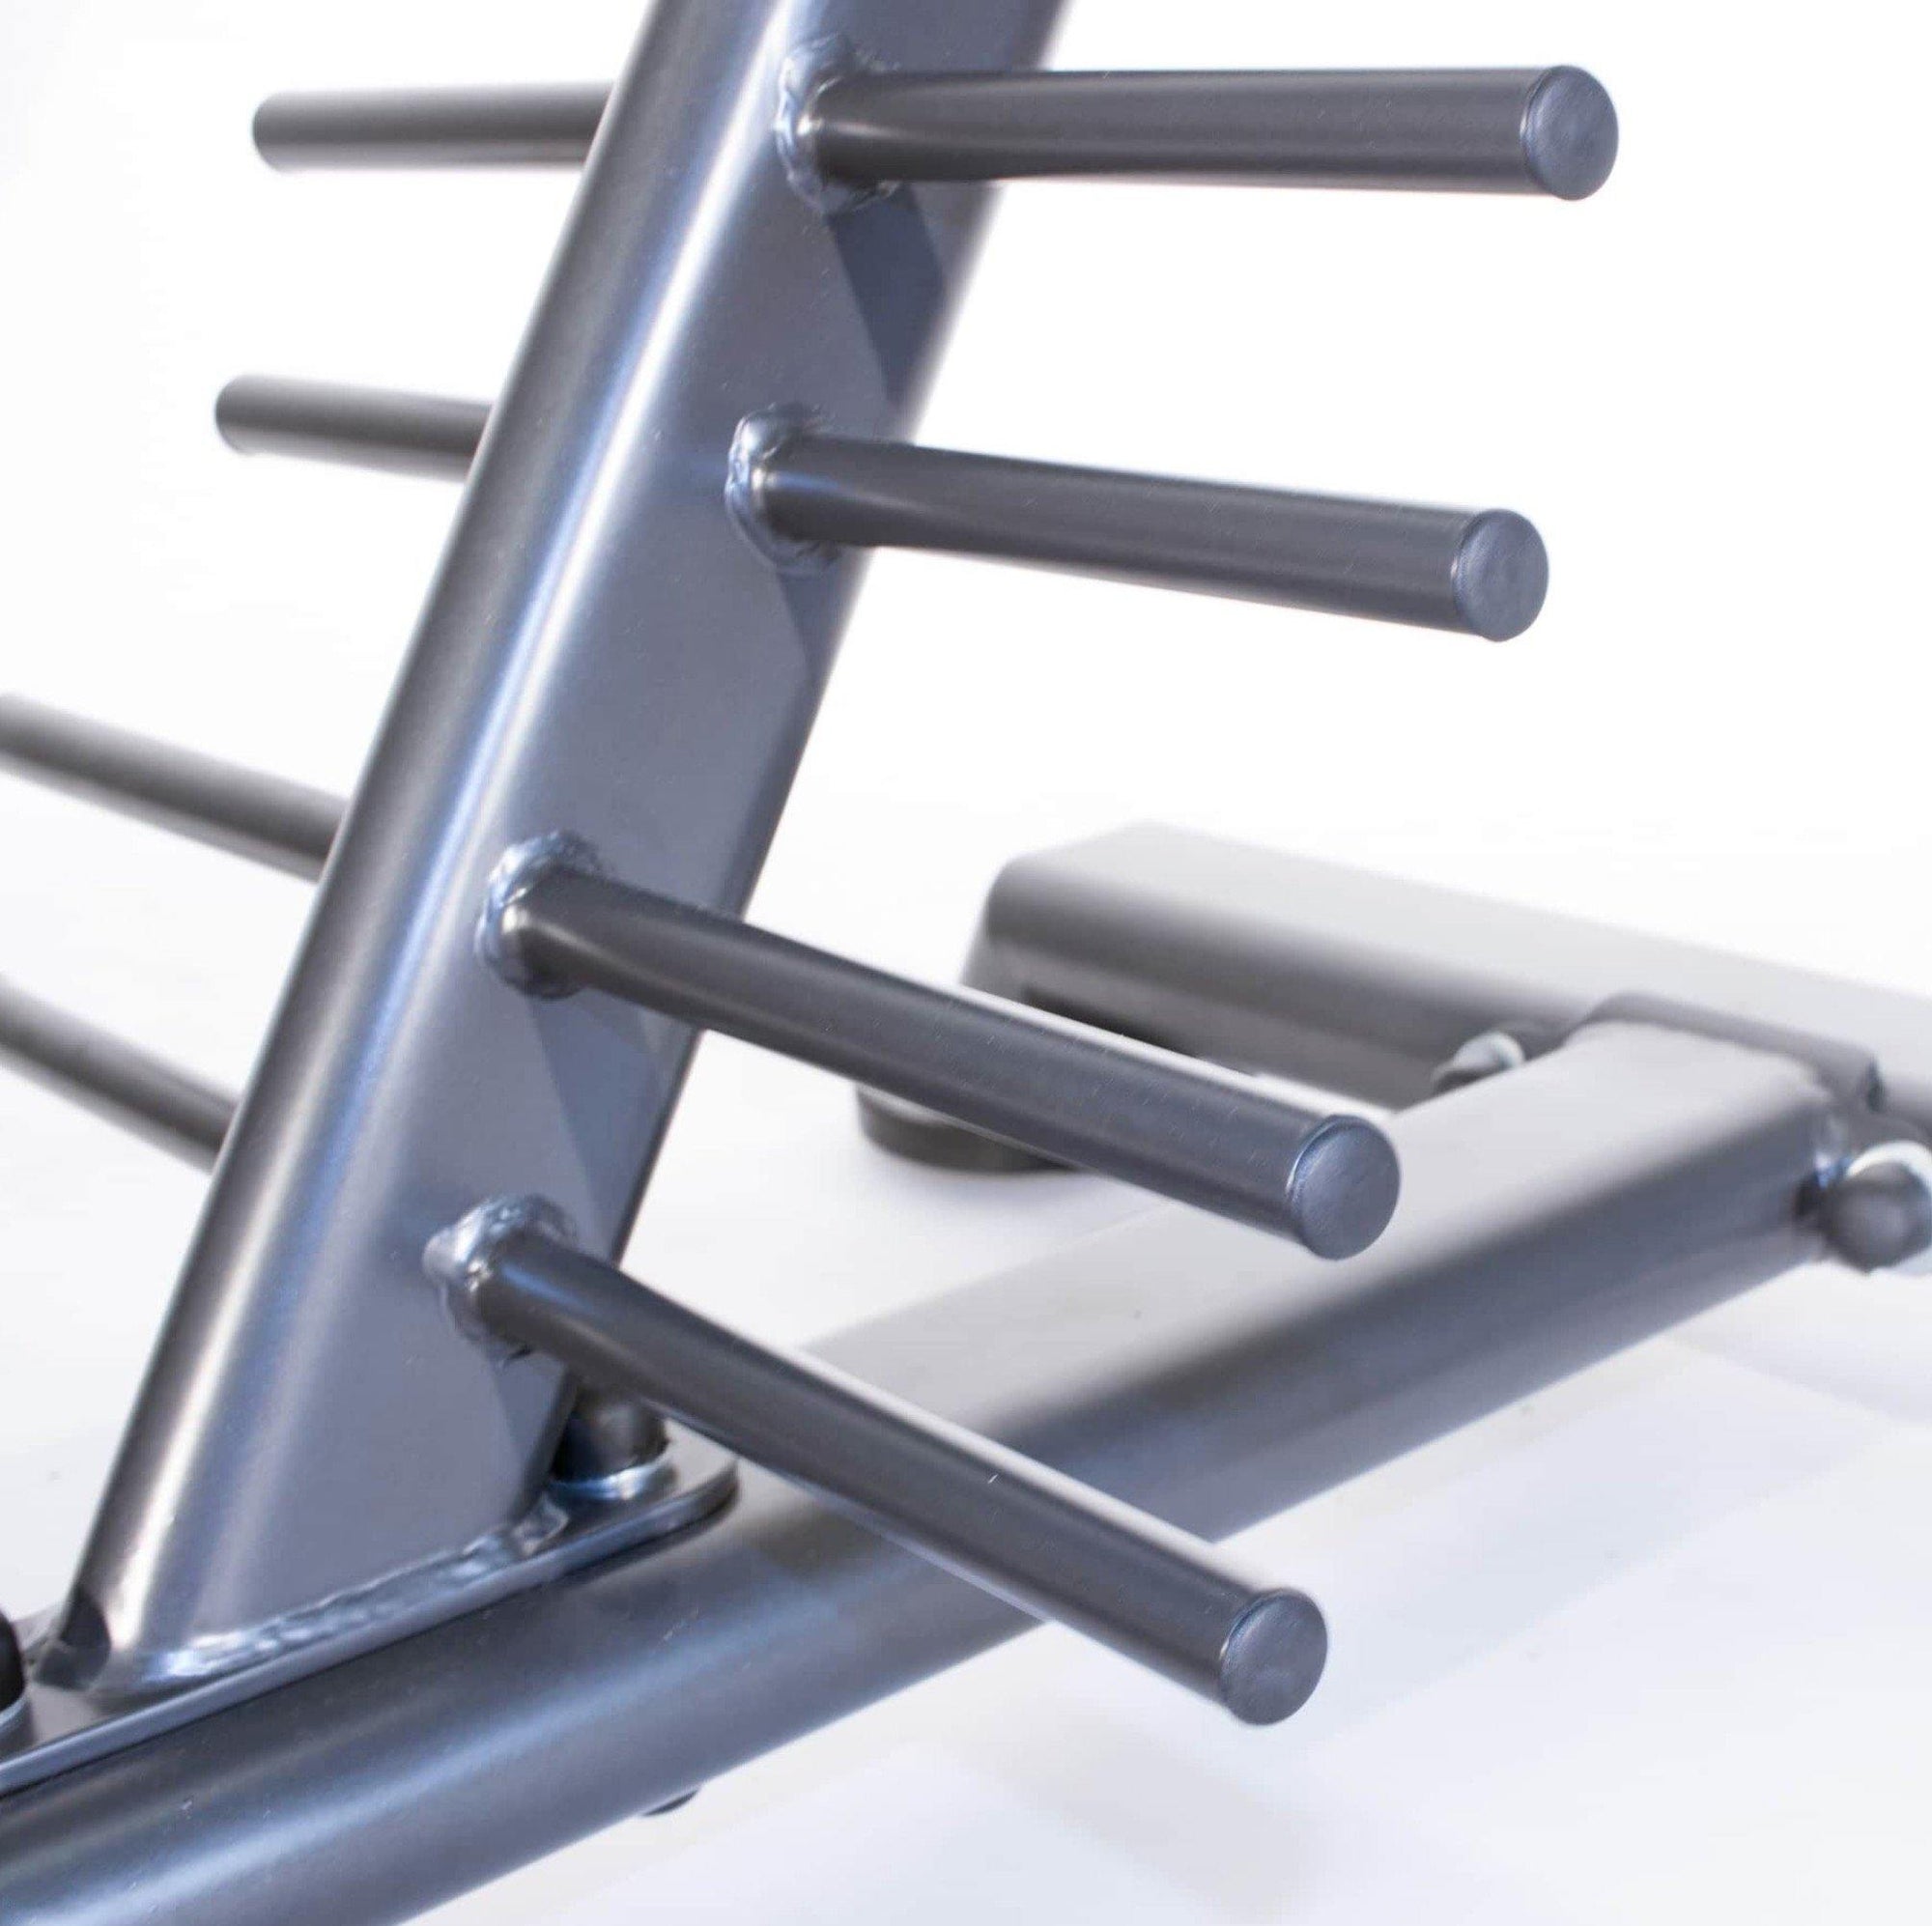 Physical Company Dumbbell Storage Rack